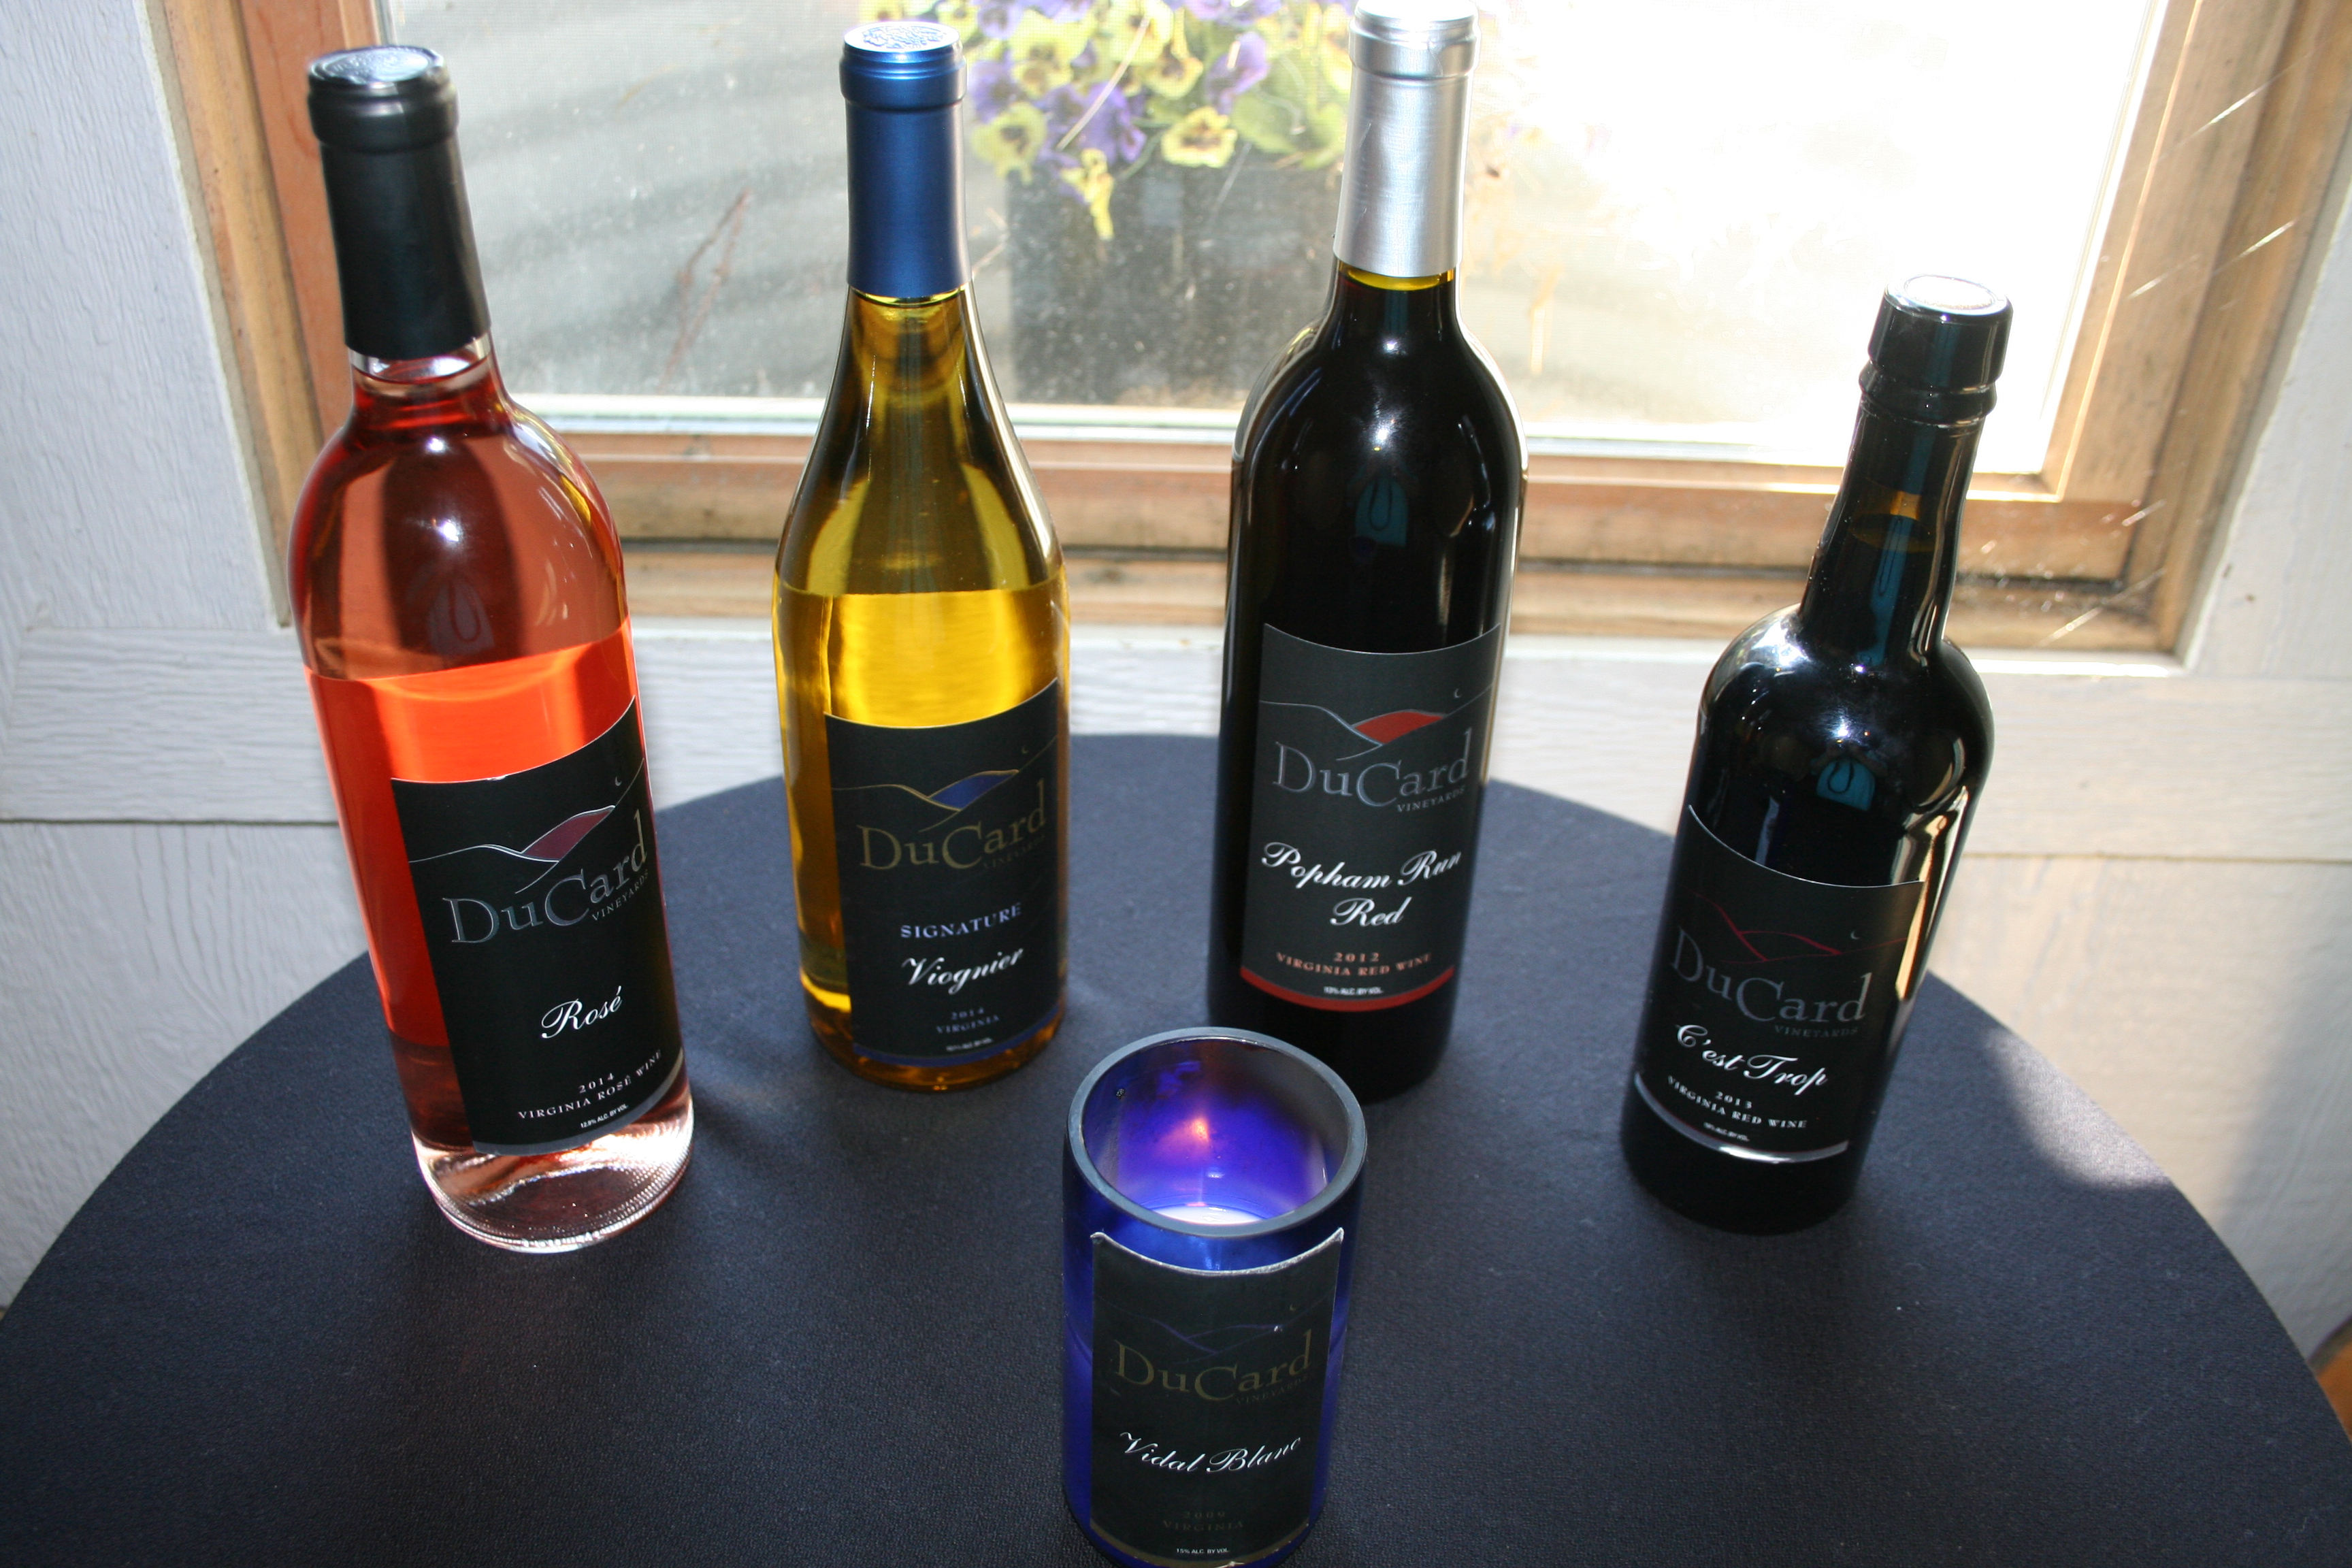 The four wines we sampled during our visit. (Photo: Mark Heckathorn/DC on heels)